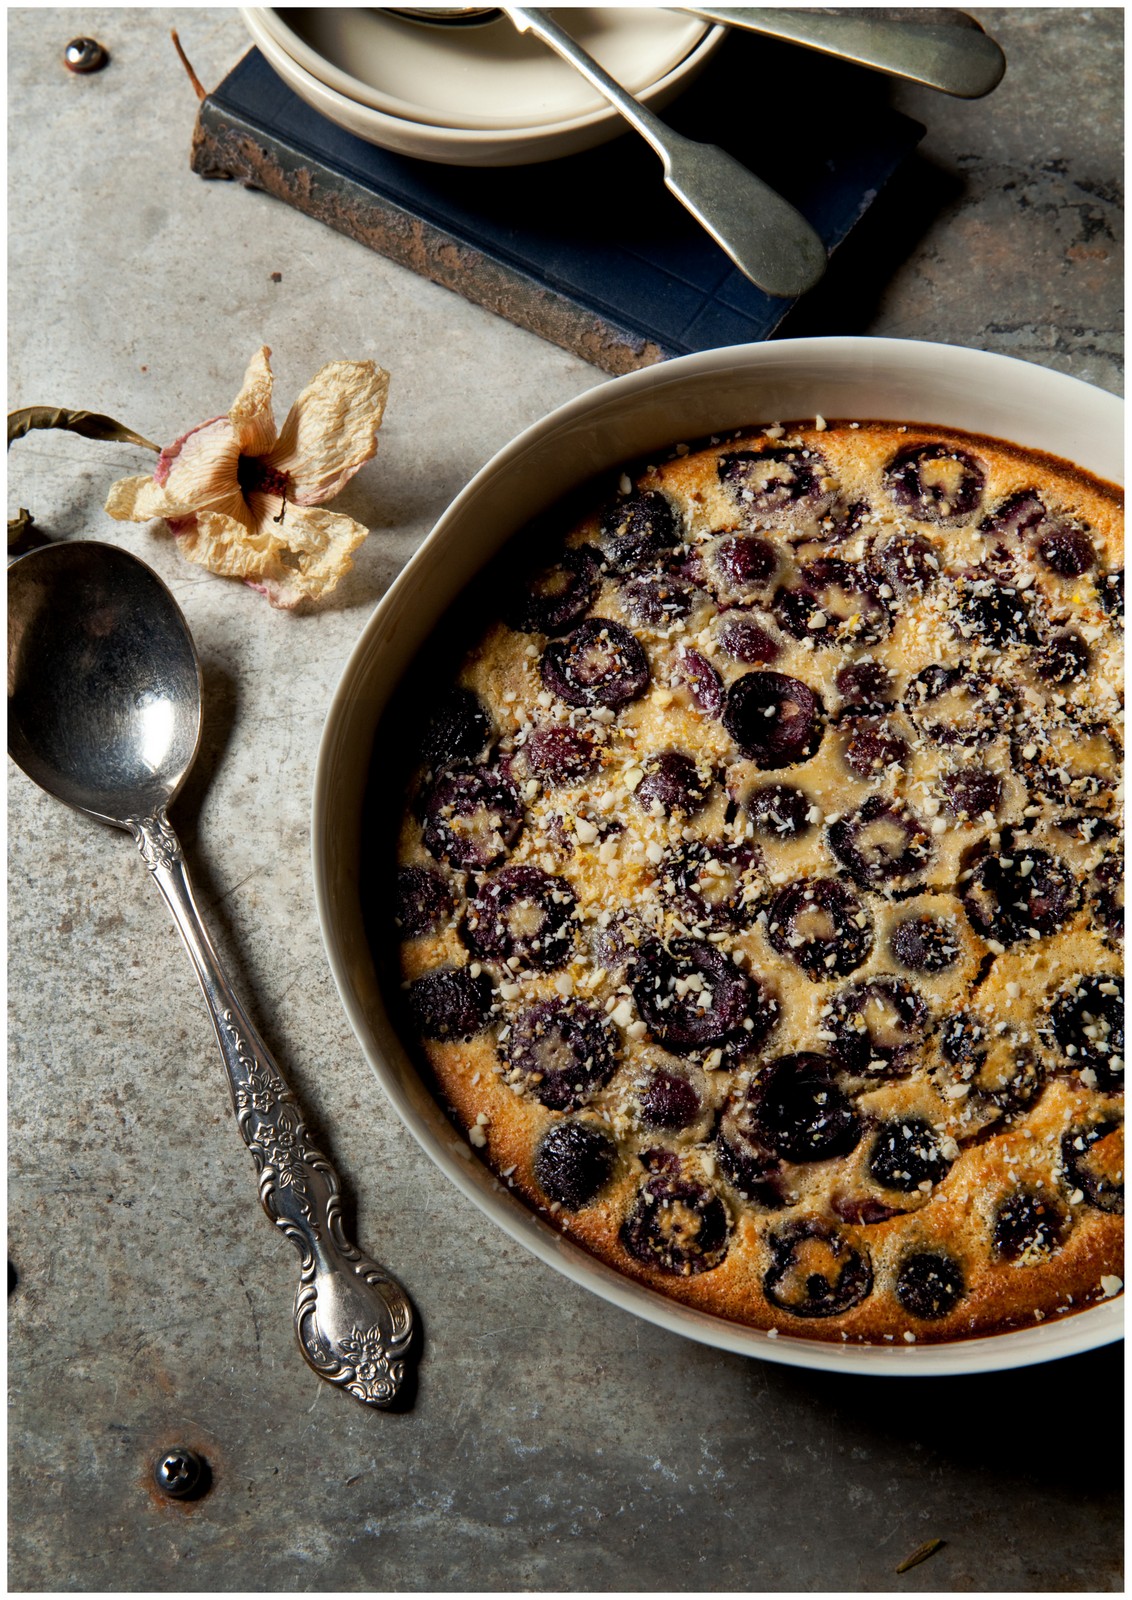 I Could Eat This For Breakfast! - Cherry Clafouti with a Lemon Almond Crumb